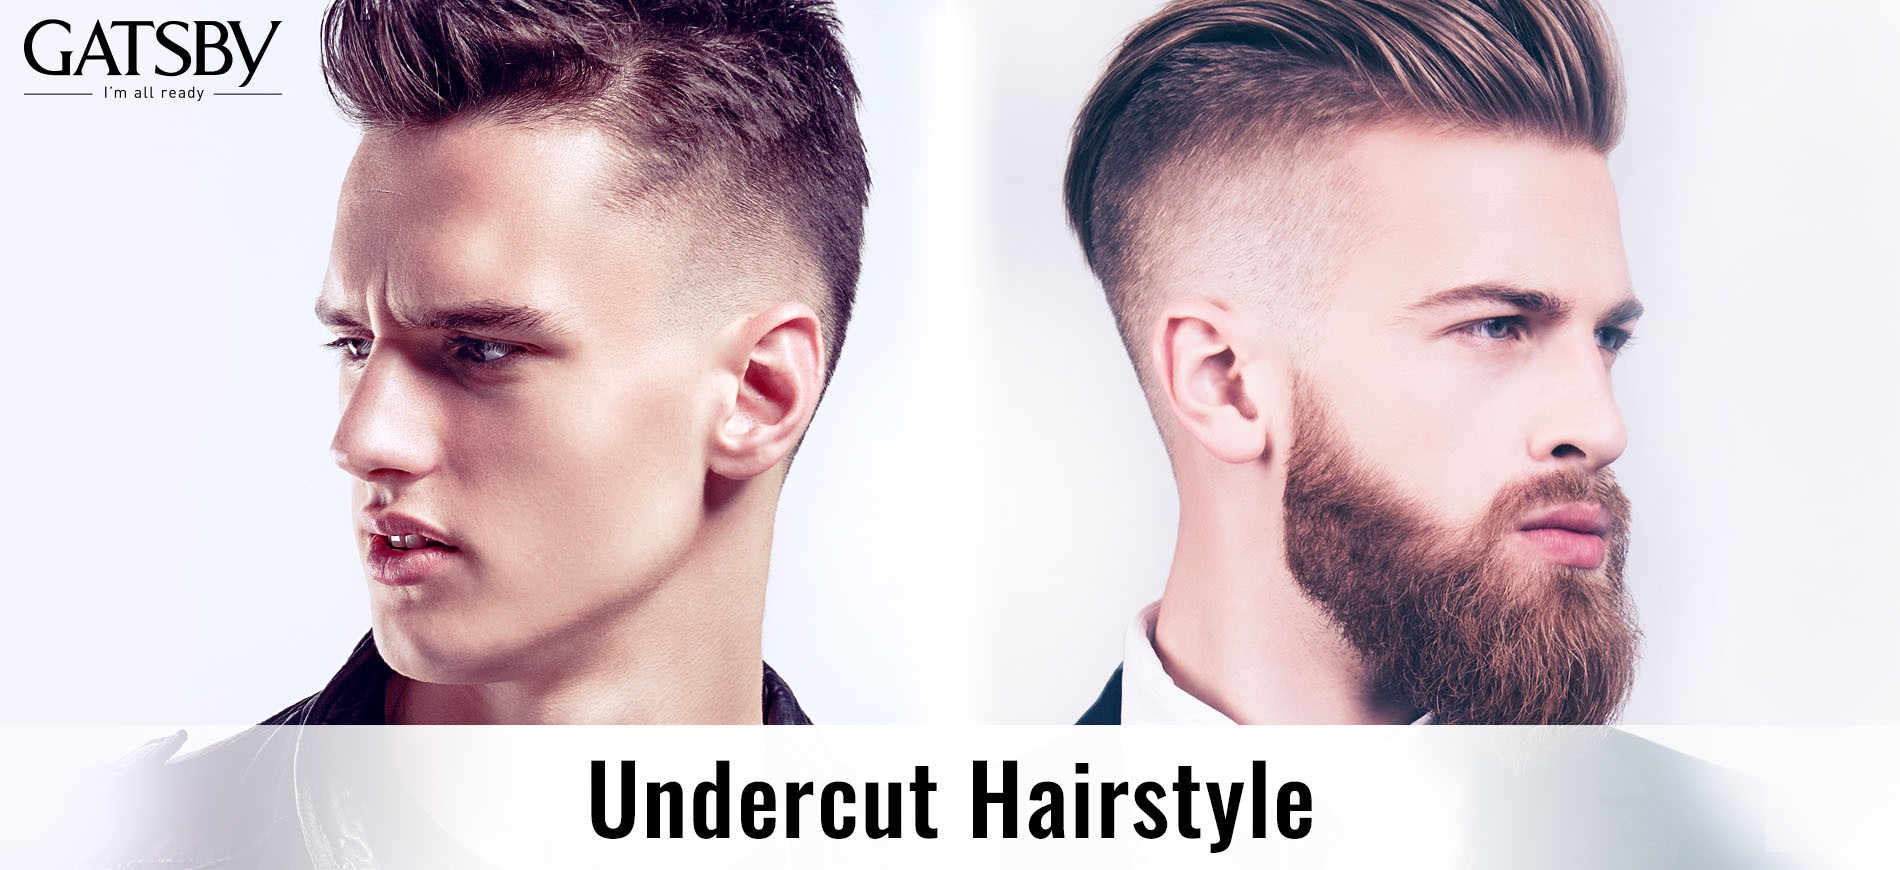 The Essential Guide to Men's Undercut Hairstyles by GATSBY